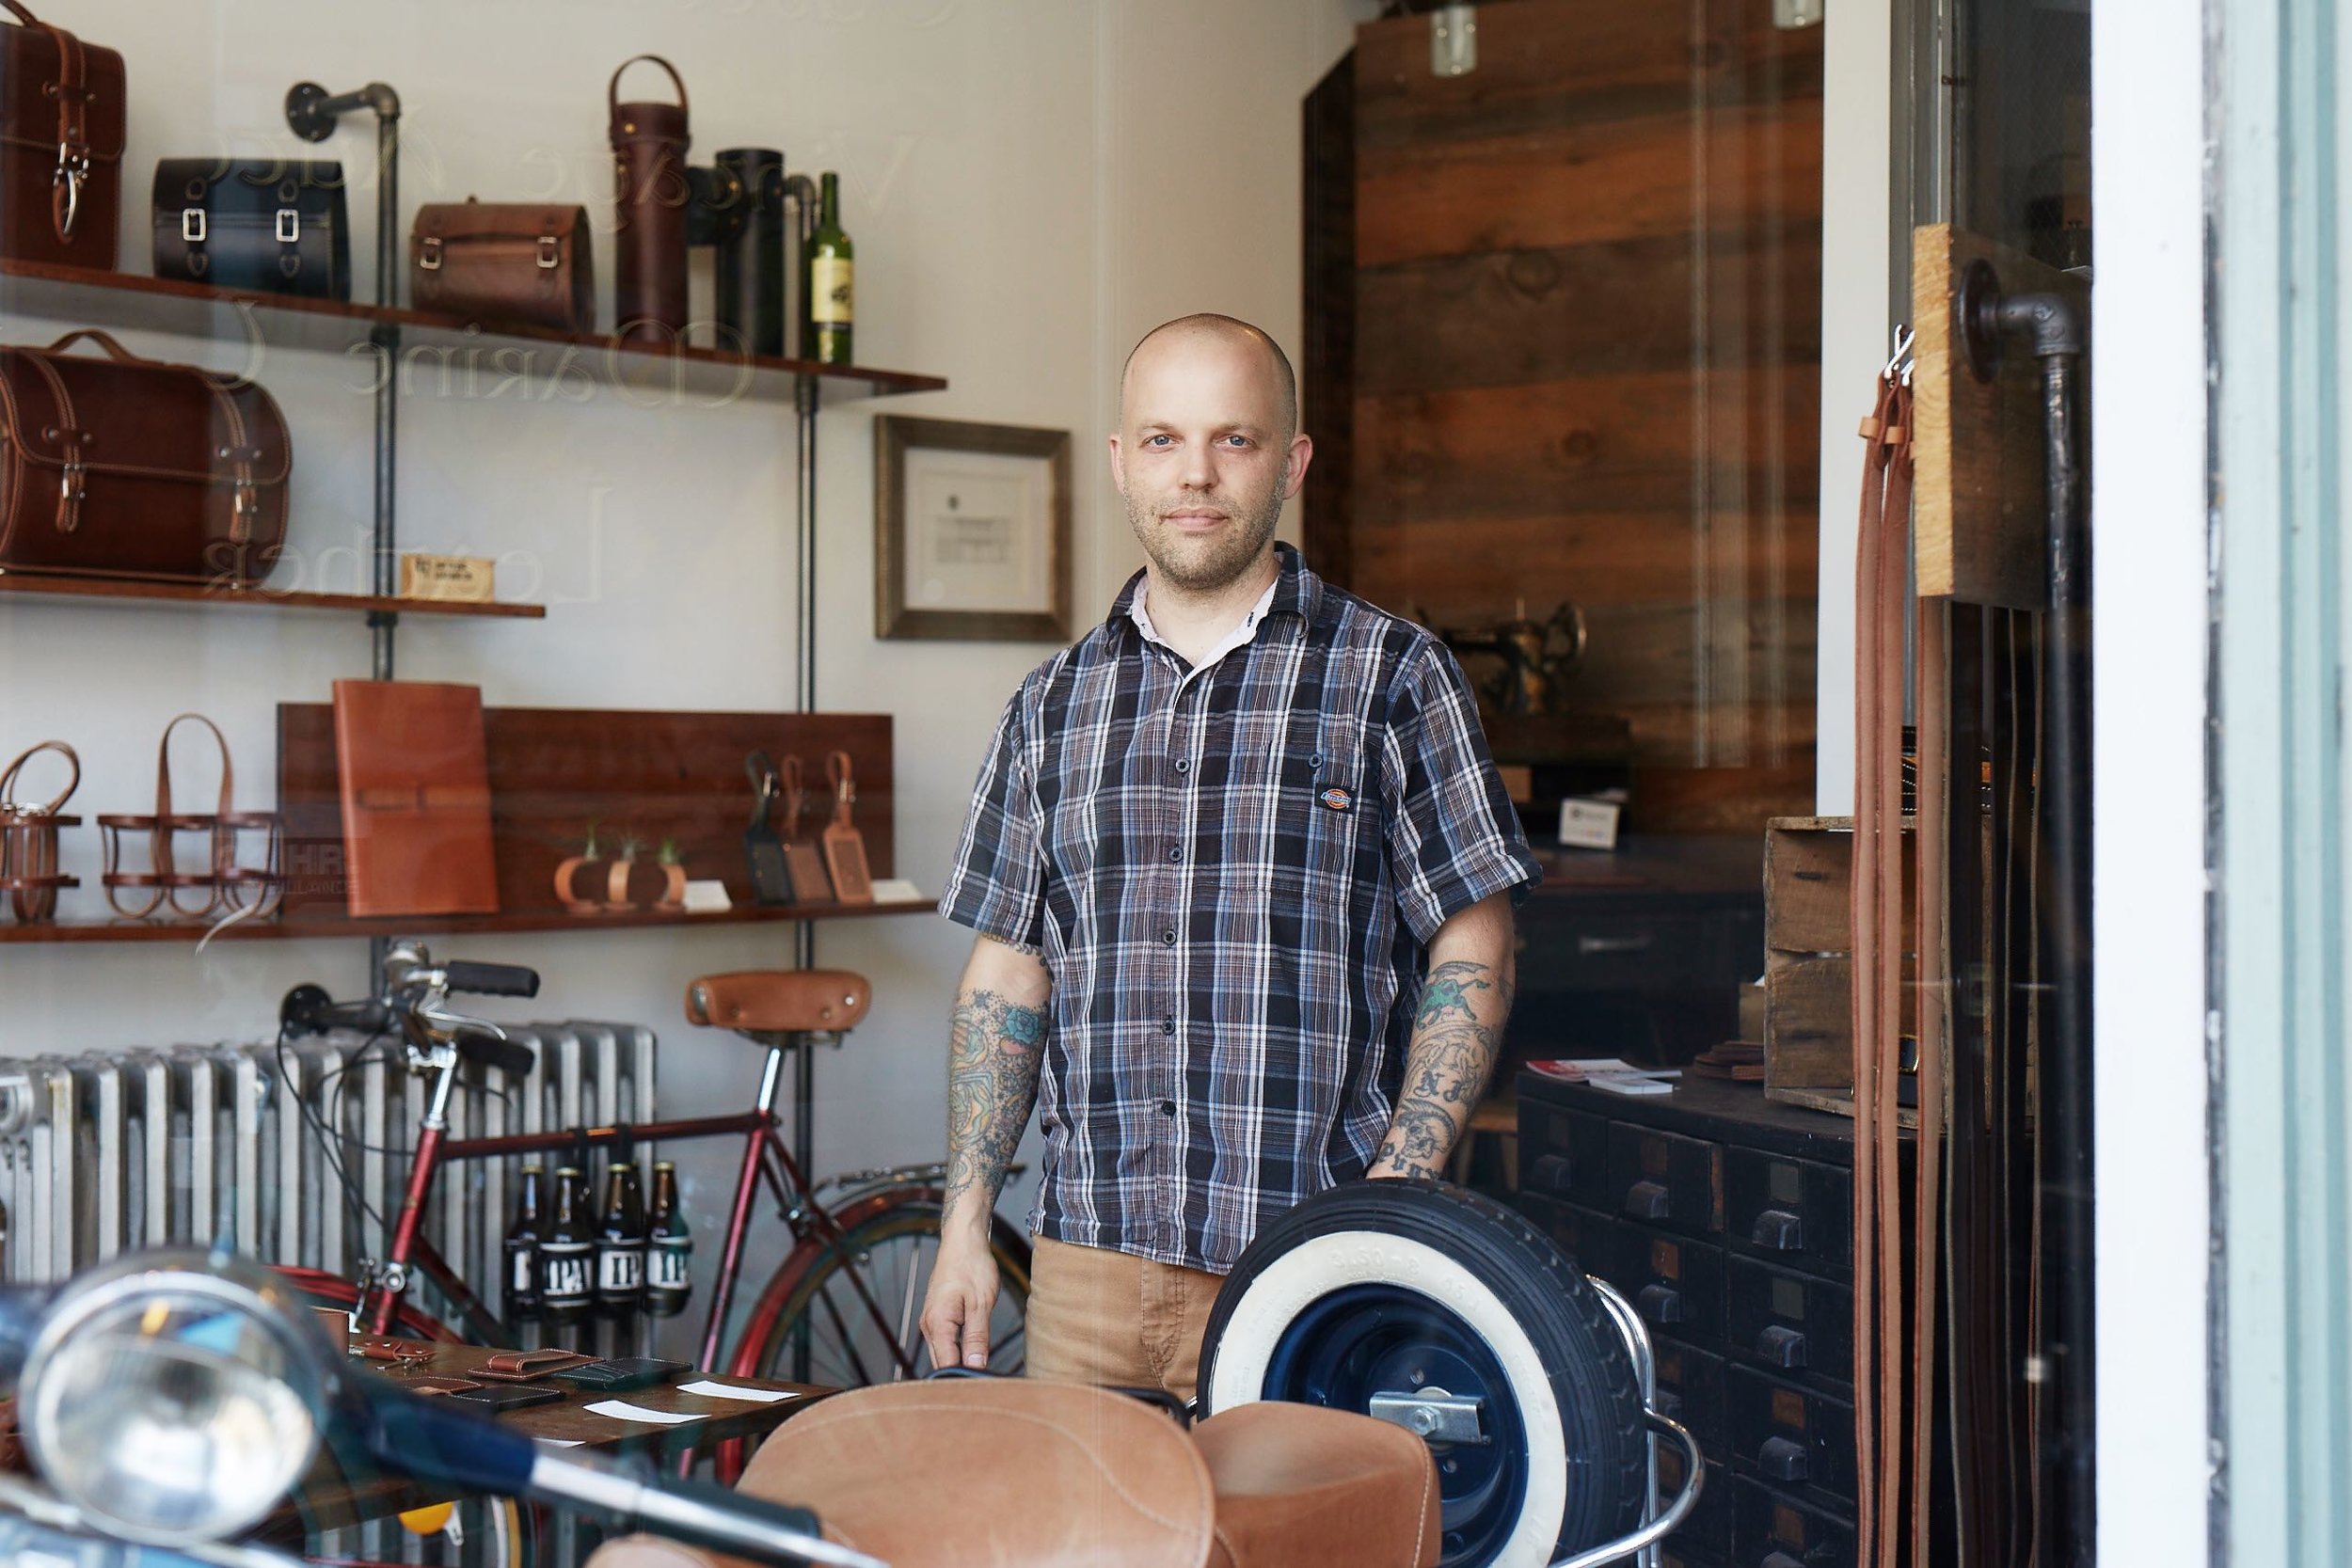 Born a craftsman, Jay Teske’s talents led him from tattoo artist to American Choppers to the creation of Jay Teske Leather Co. Photo by Brandon Schulman.